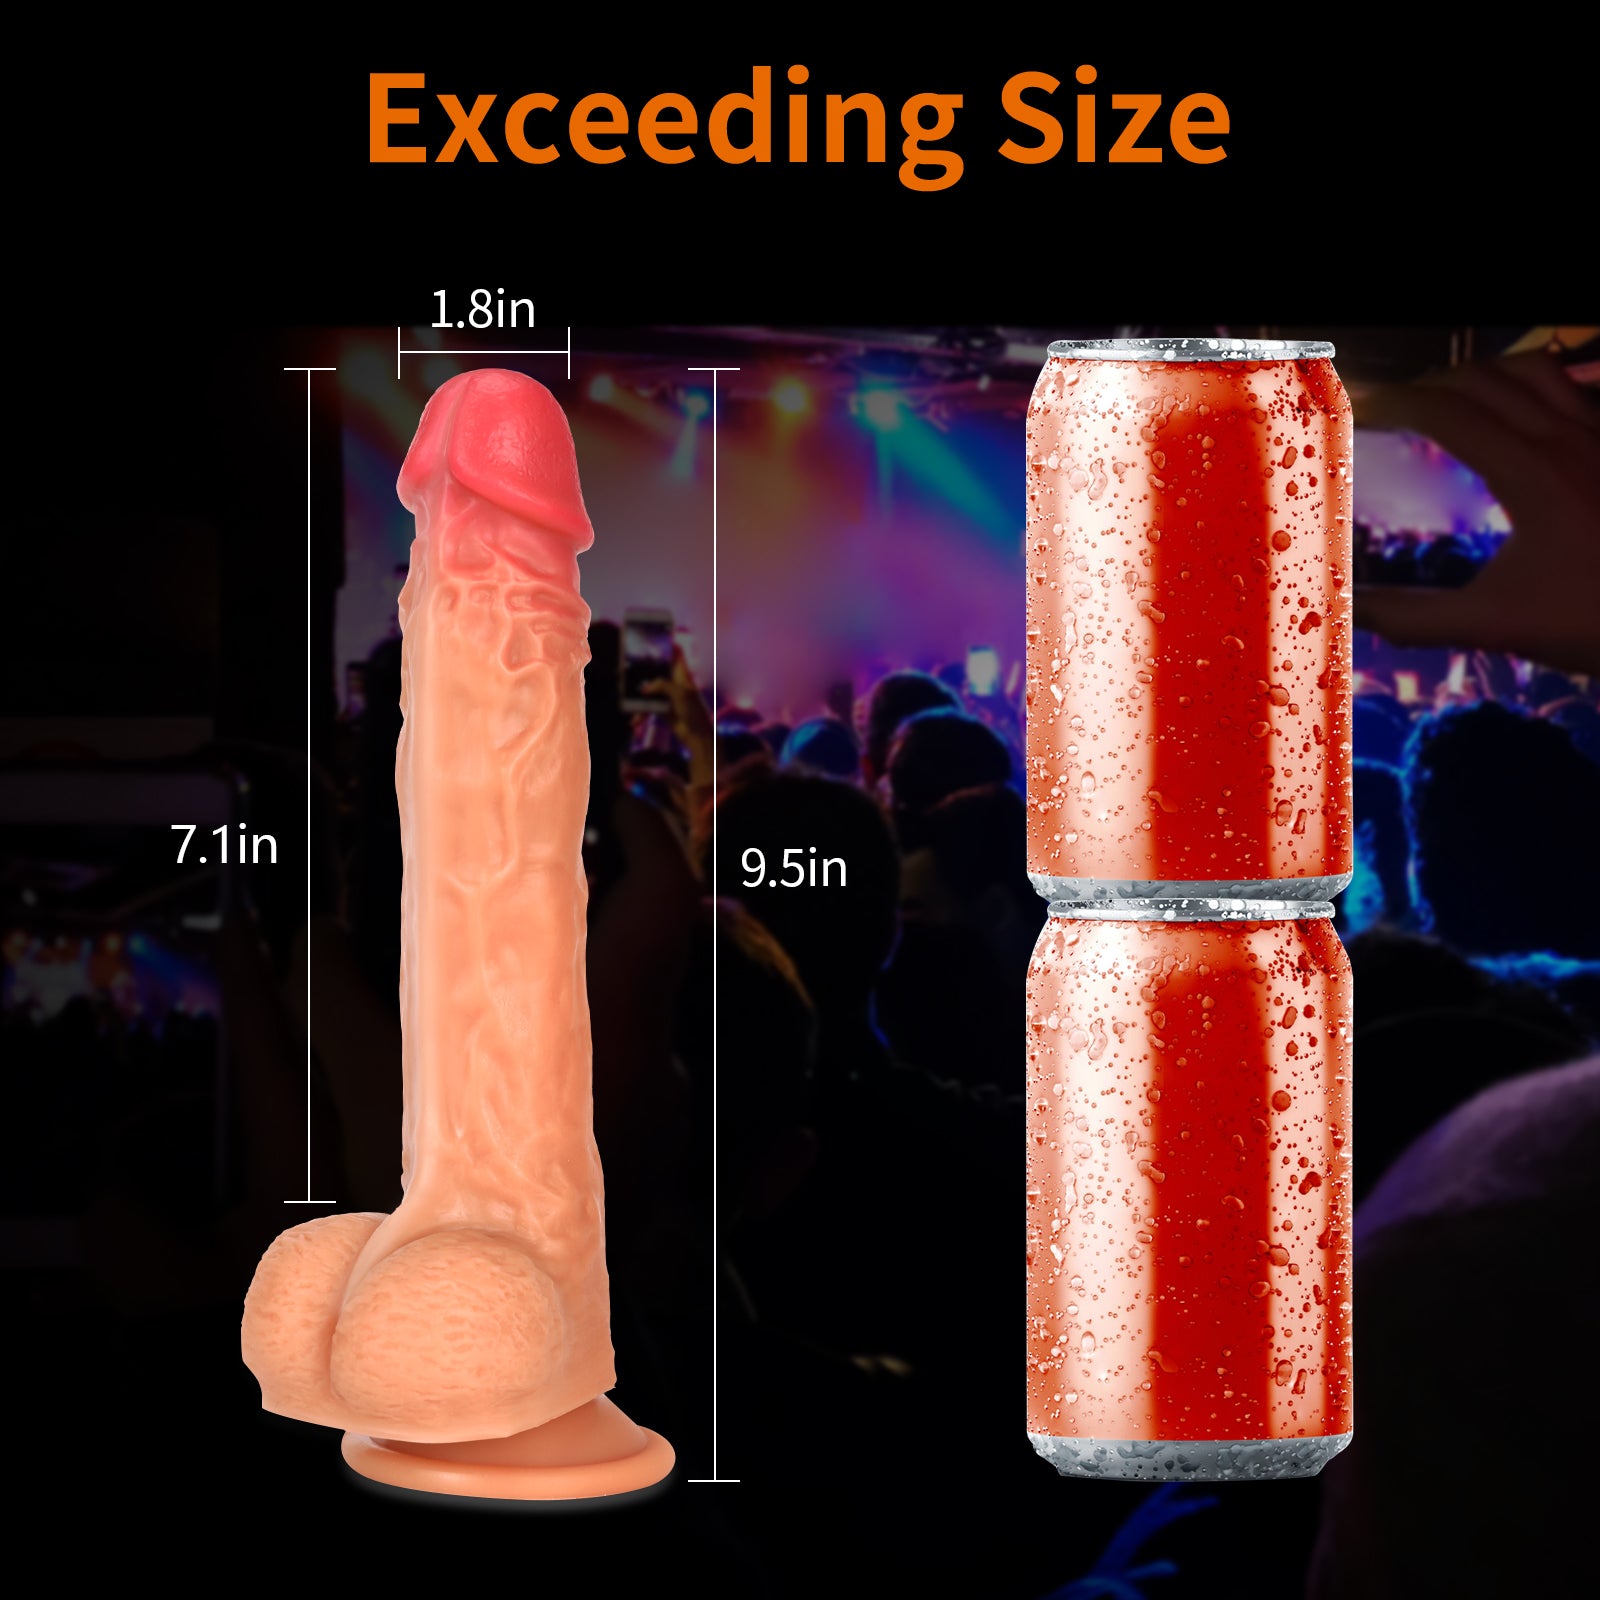 FIDECH 4 in 1 Rotating Thrusting Heating Vibrating Realistic Silicone Dildo